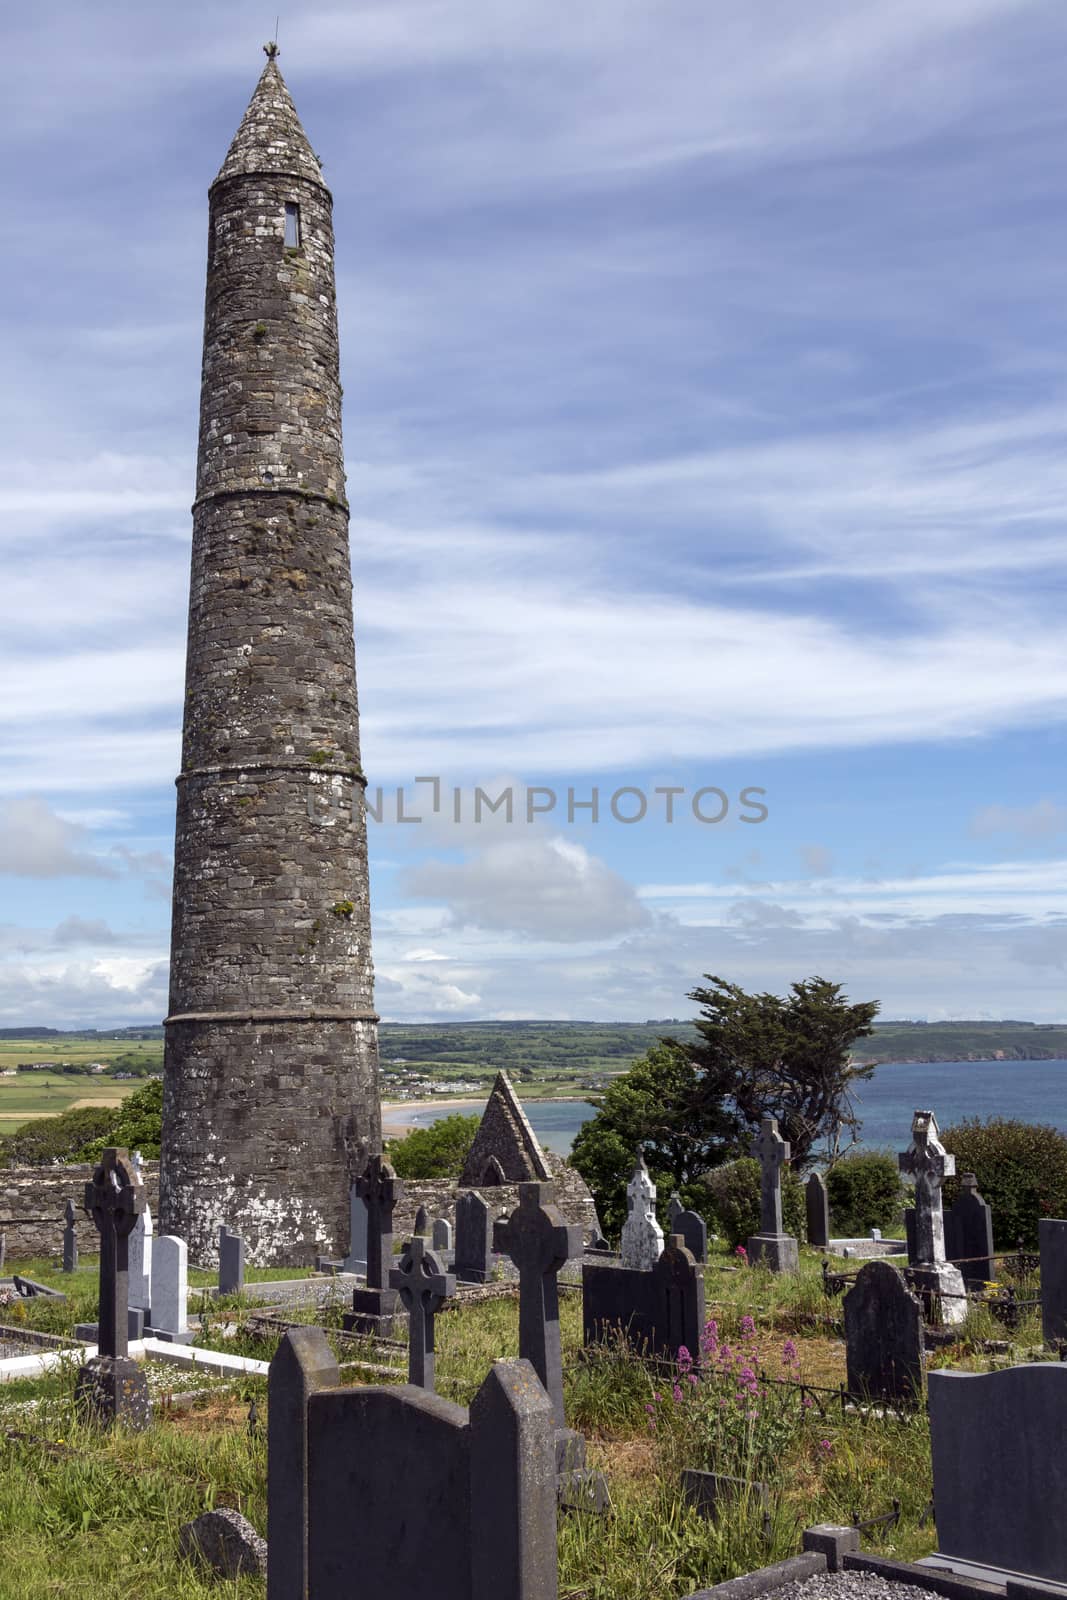 The ruins of Ardmore Cathedral and round tower, County Waterford in the Republic of Ireland. On a hill above the village of Ardmore is a well-preserved 30m, 12th-century round tower and the ruins of a Cathedral dating from the 13th century.